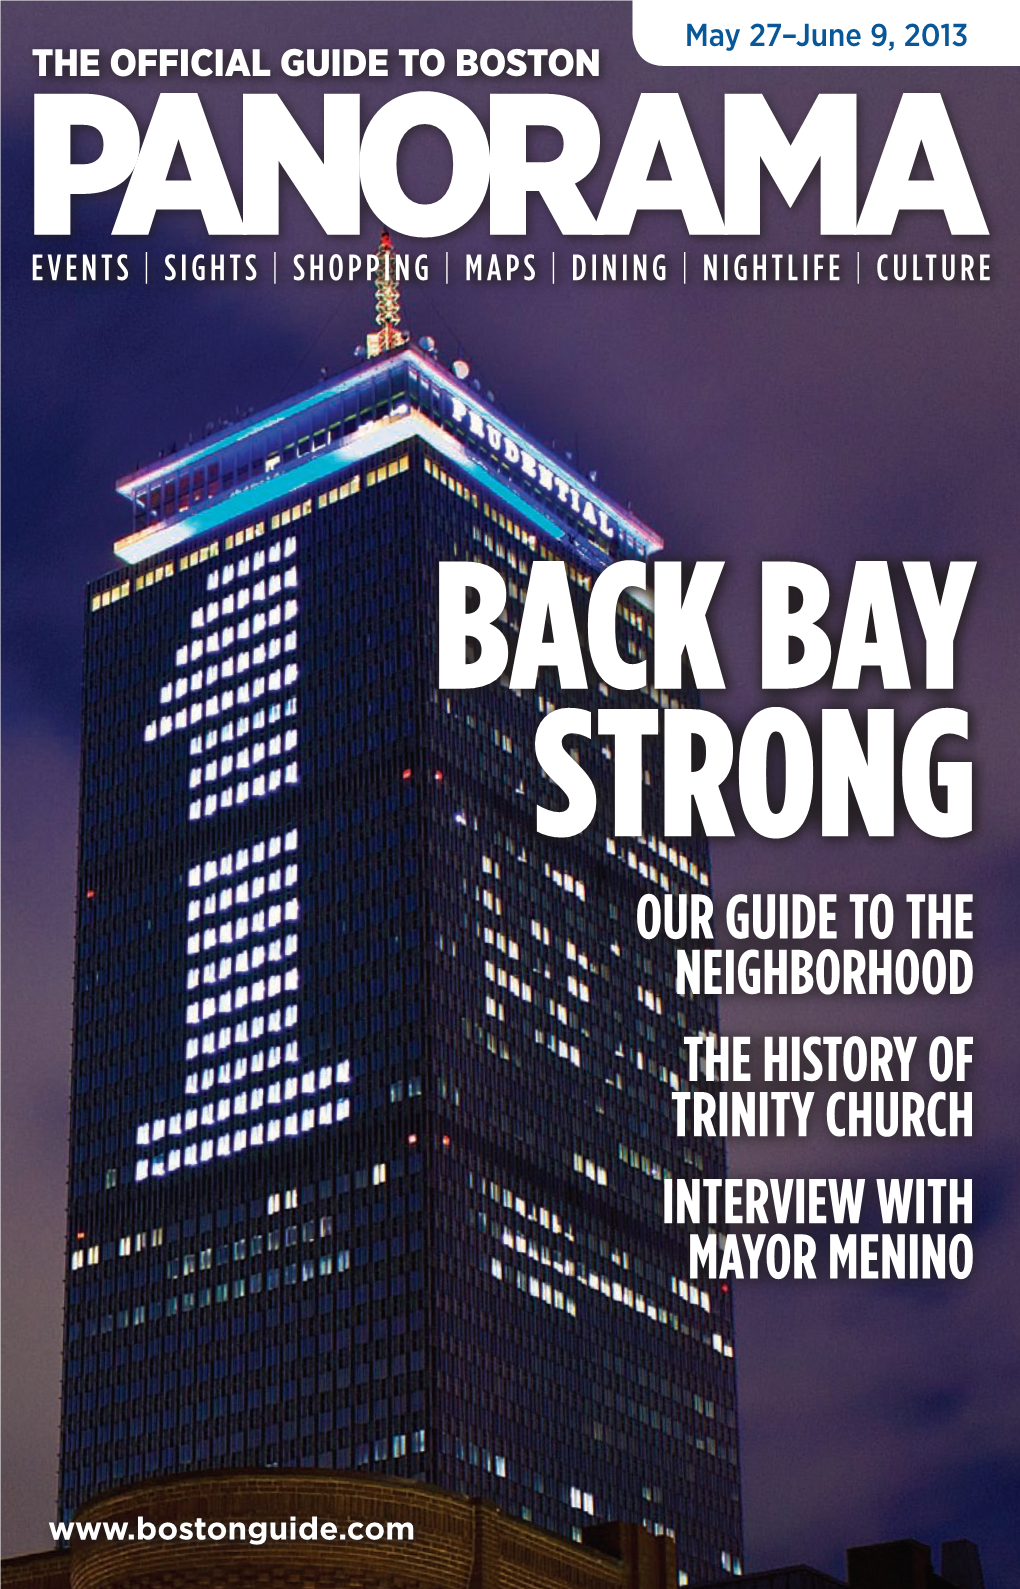 Our Guide to the Neighborhood the History of Trinity Church Interview with Mayor Menino